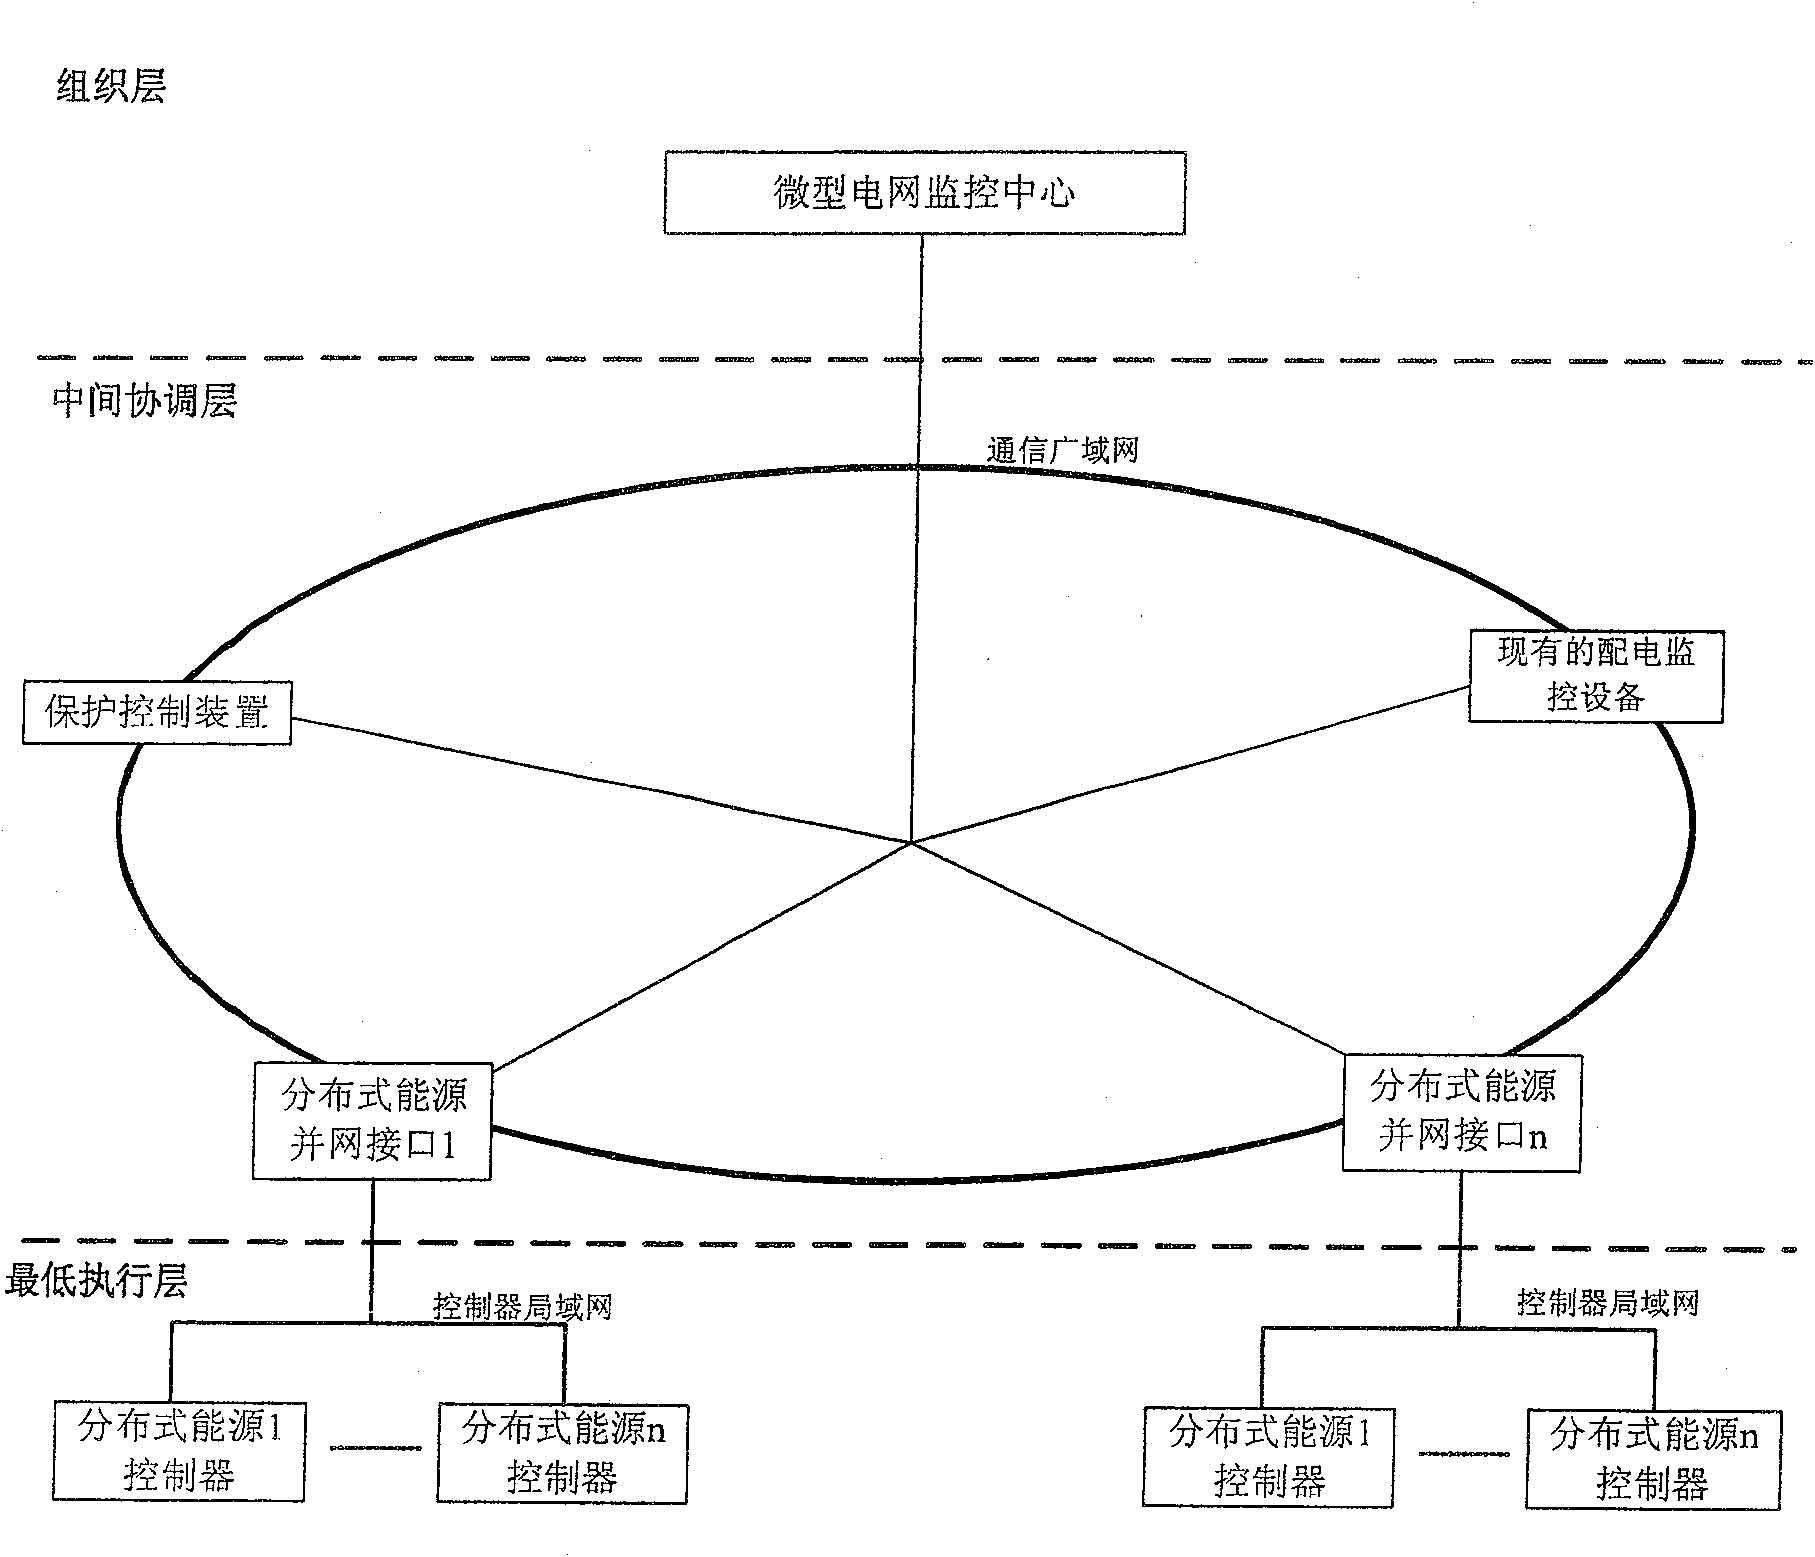 System for controlling and managing micro power network